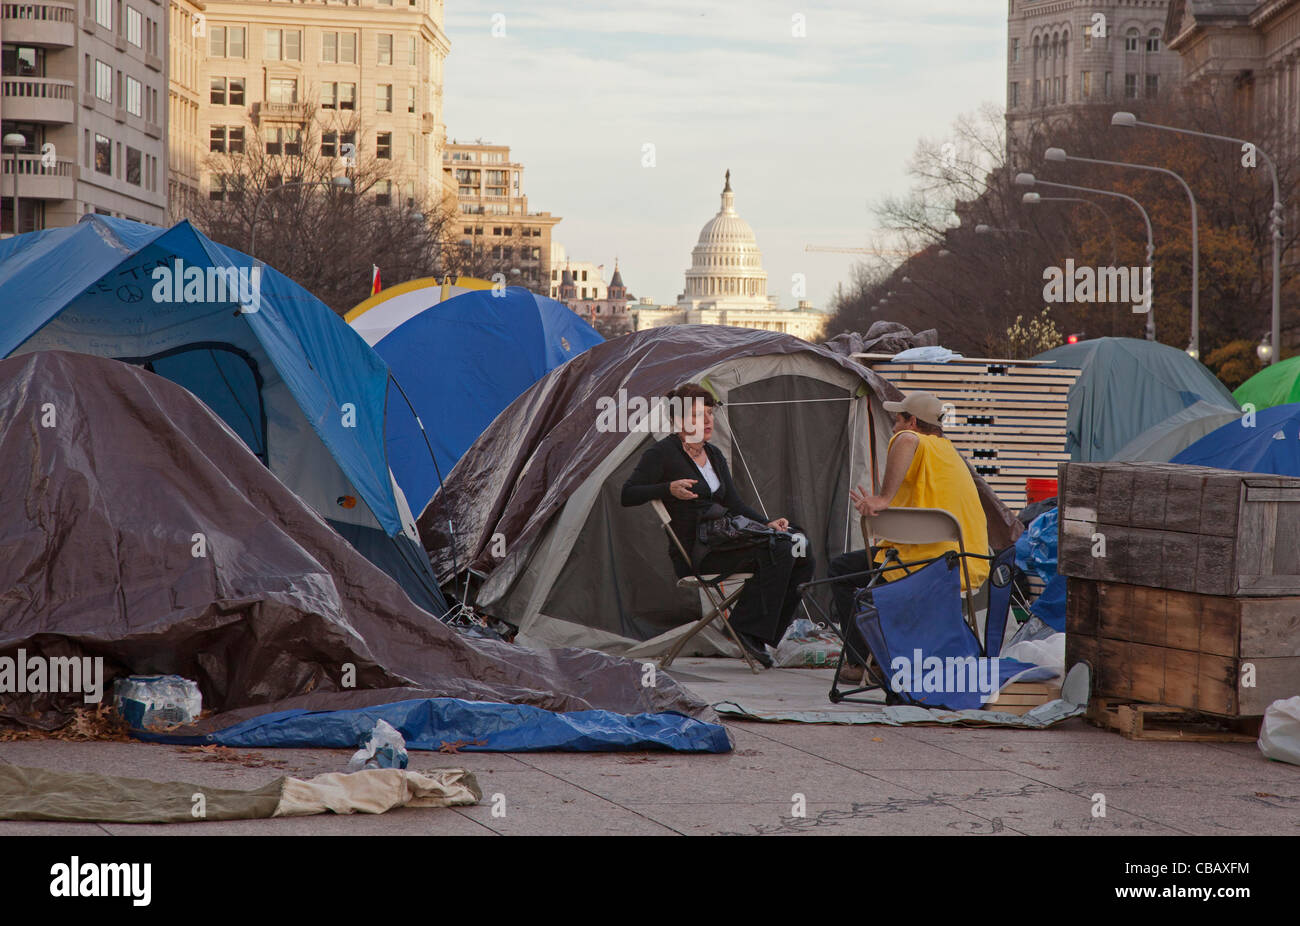 Washington, DC - The Occupy Washington DC camp on Freedom Plaza, just up the street from the U.S. Capitol. Stock Photo